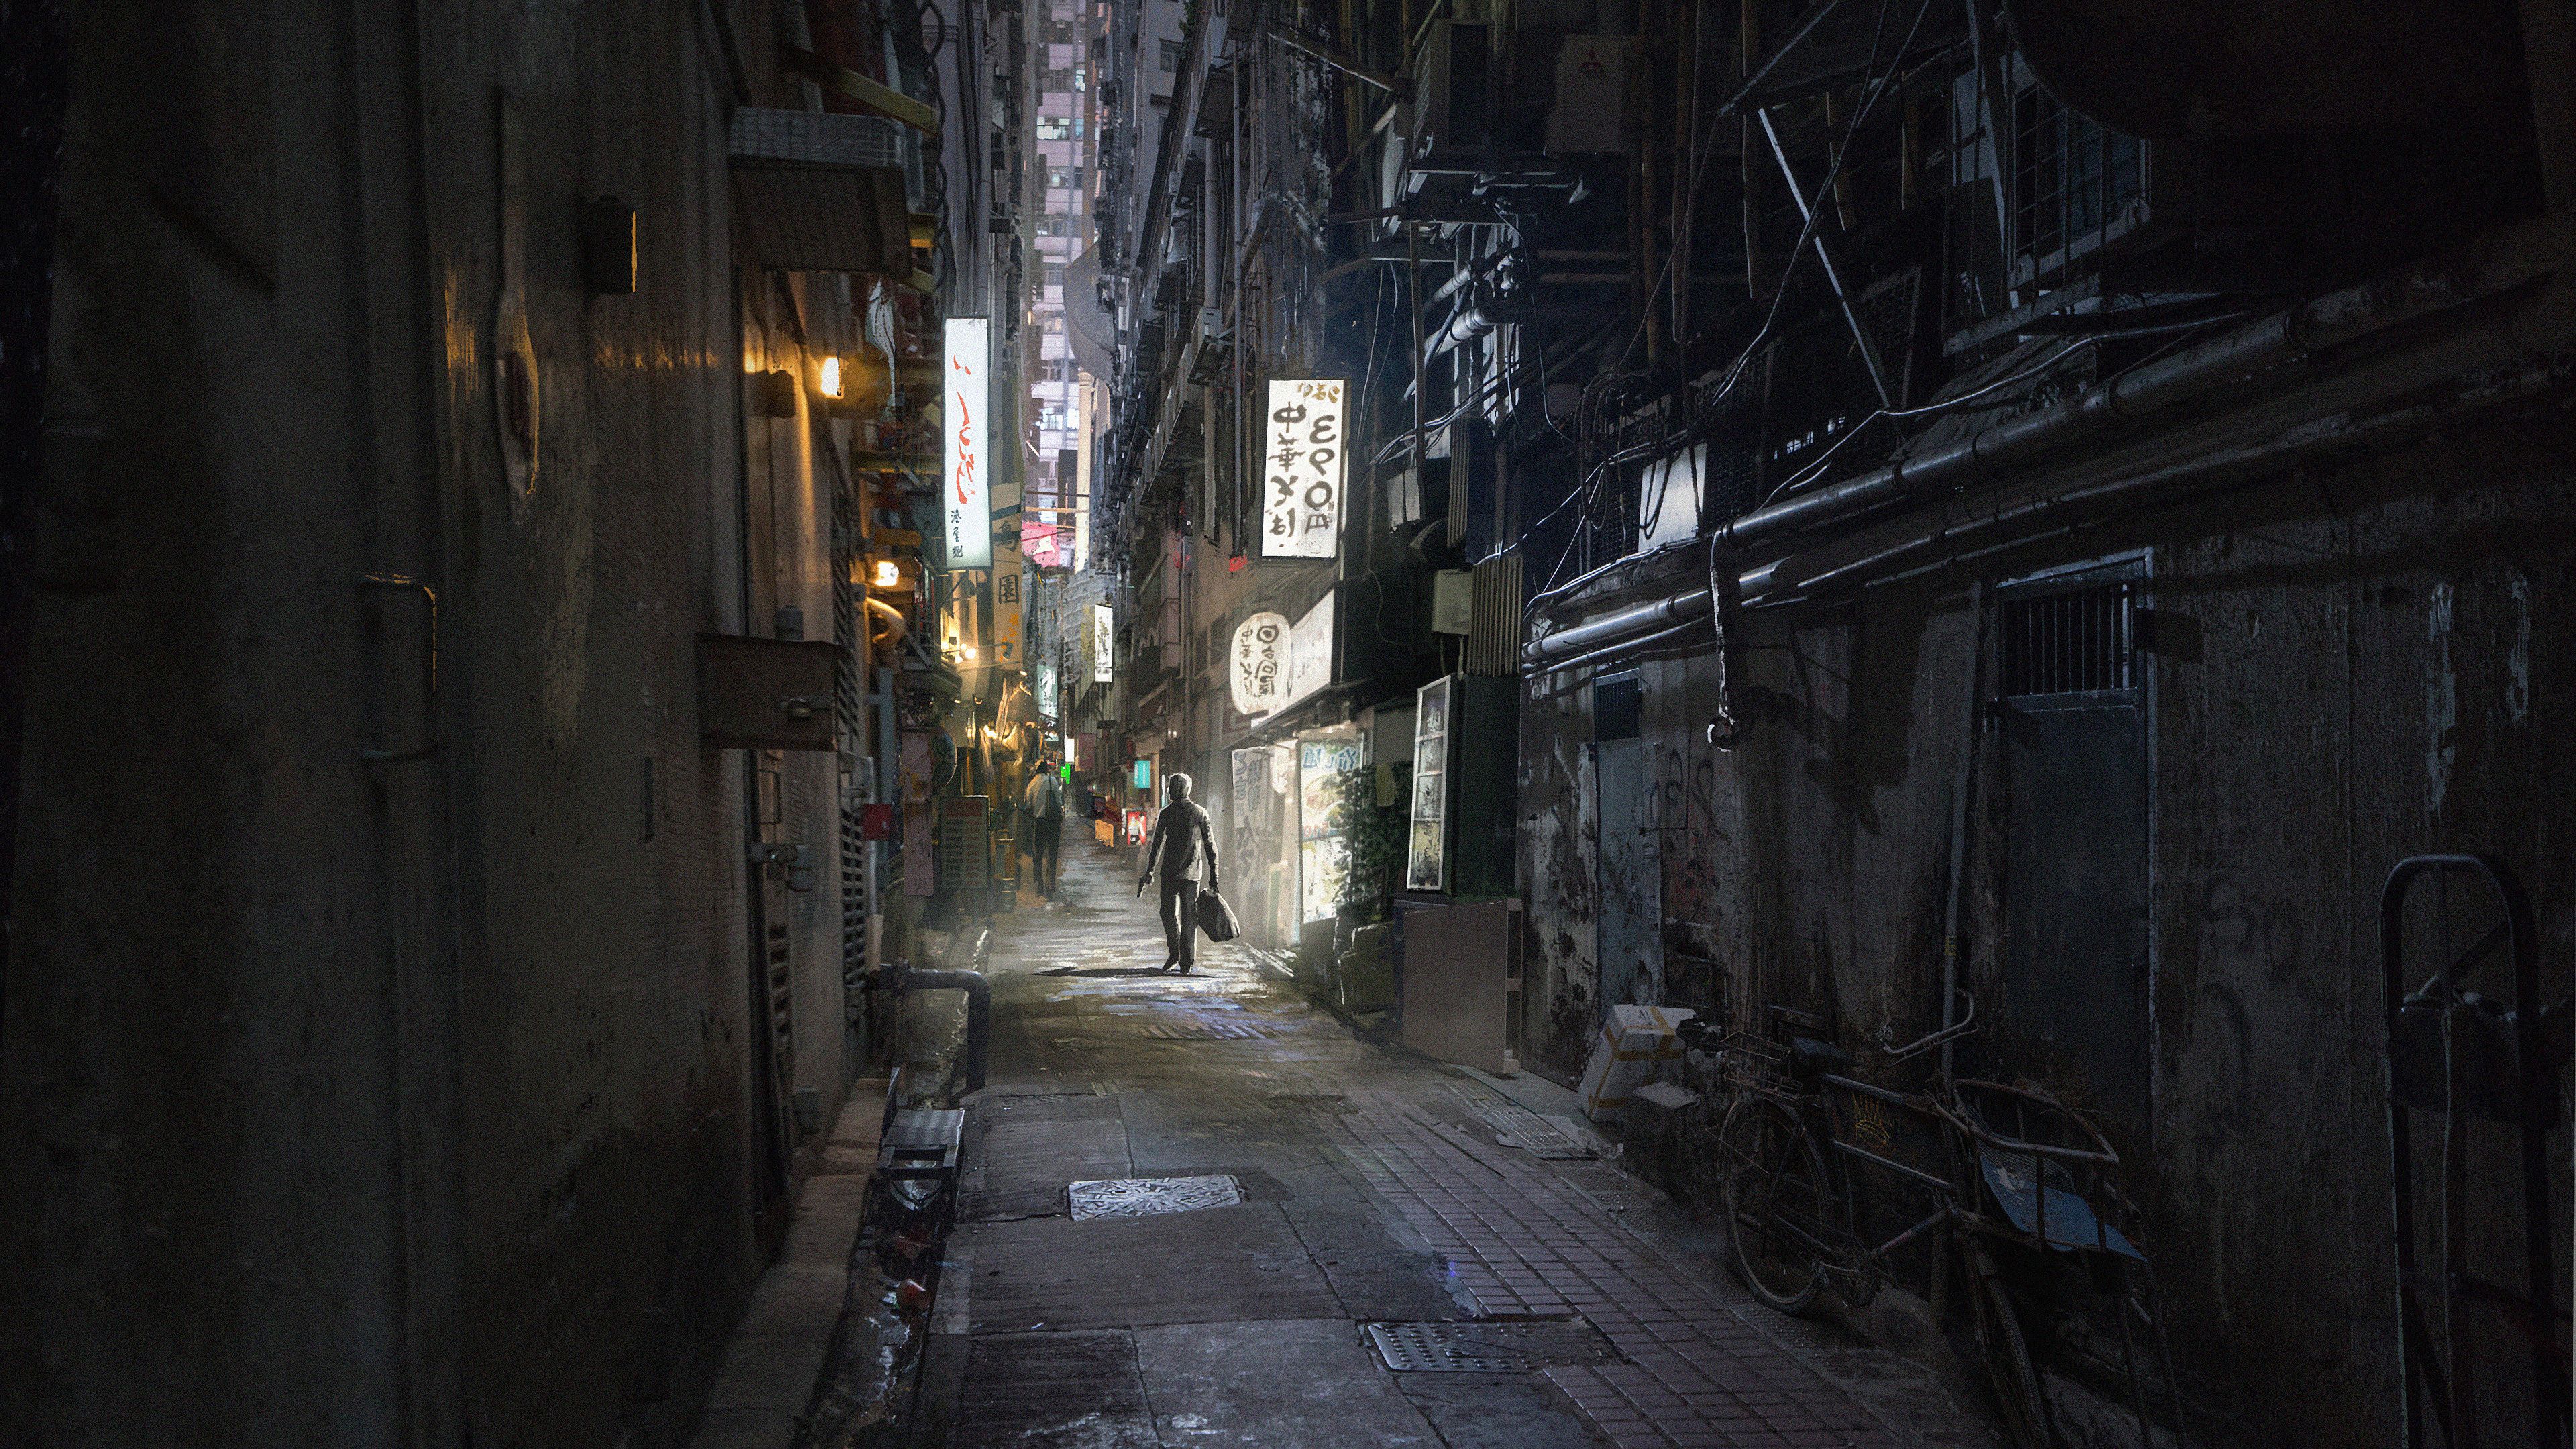 Dangerous Alley, HD Artist, 4k Wallpaper, Image, Background, Photo and Picture